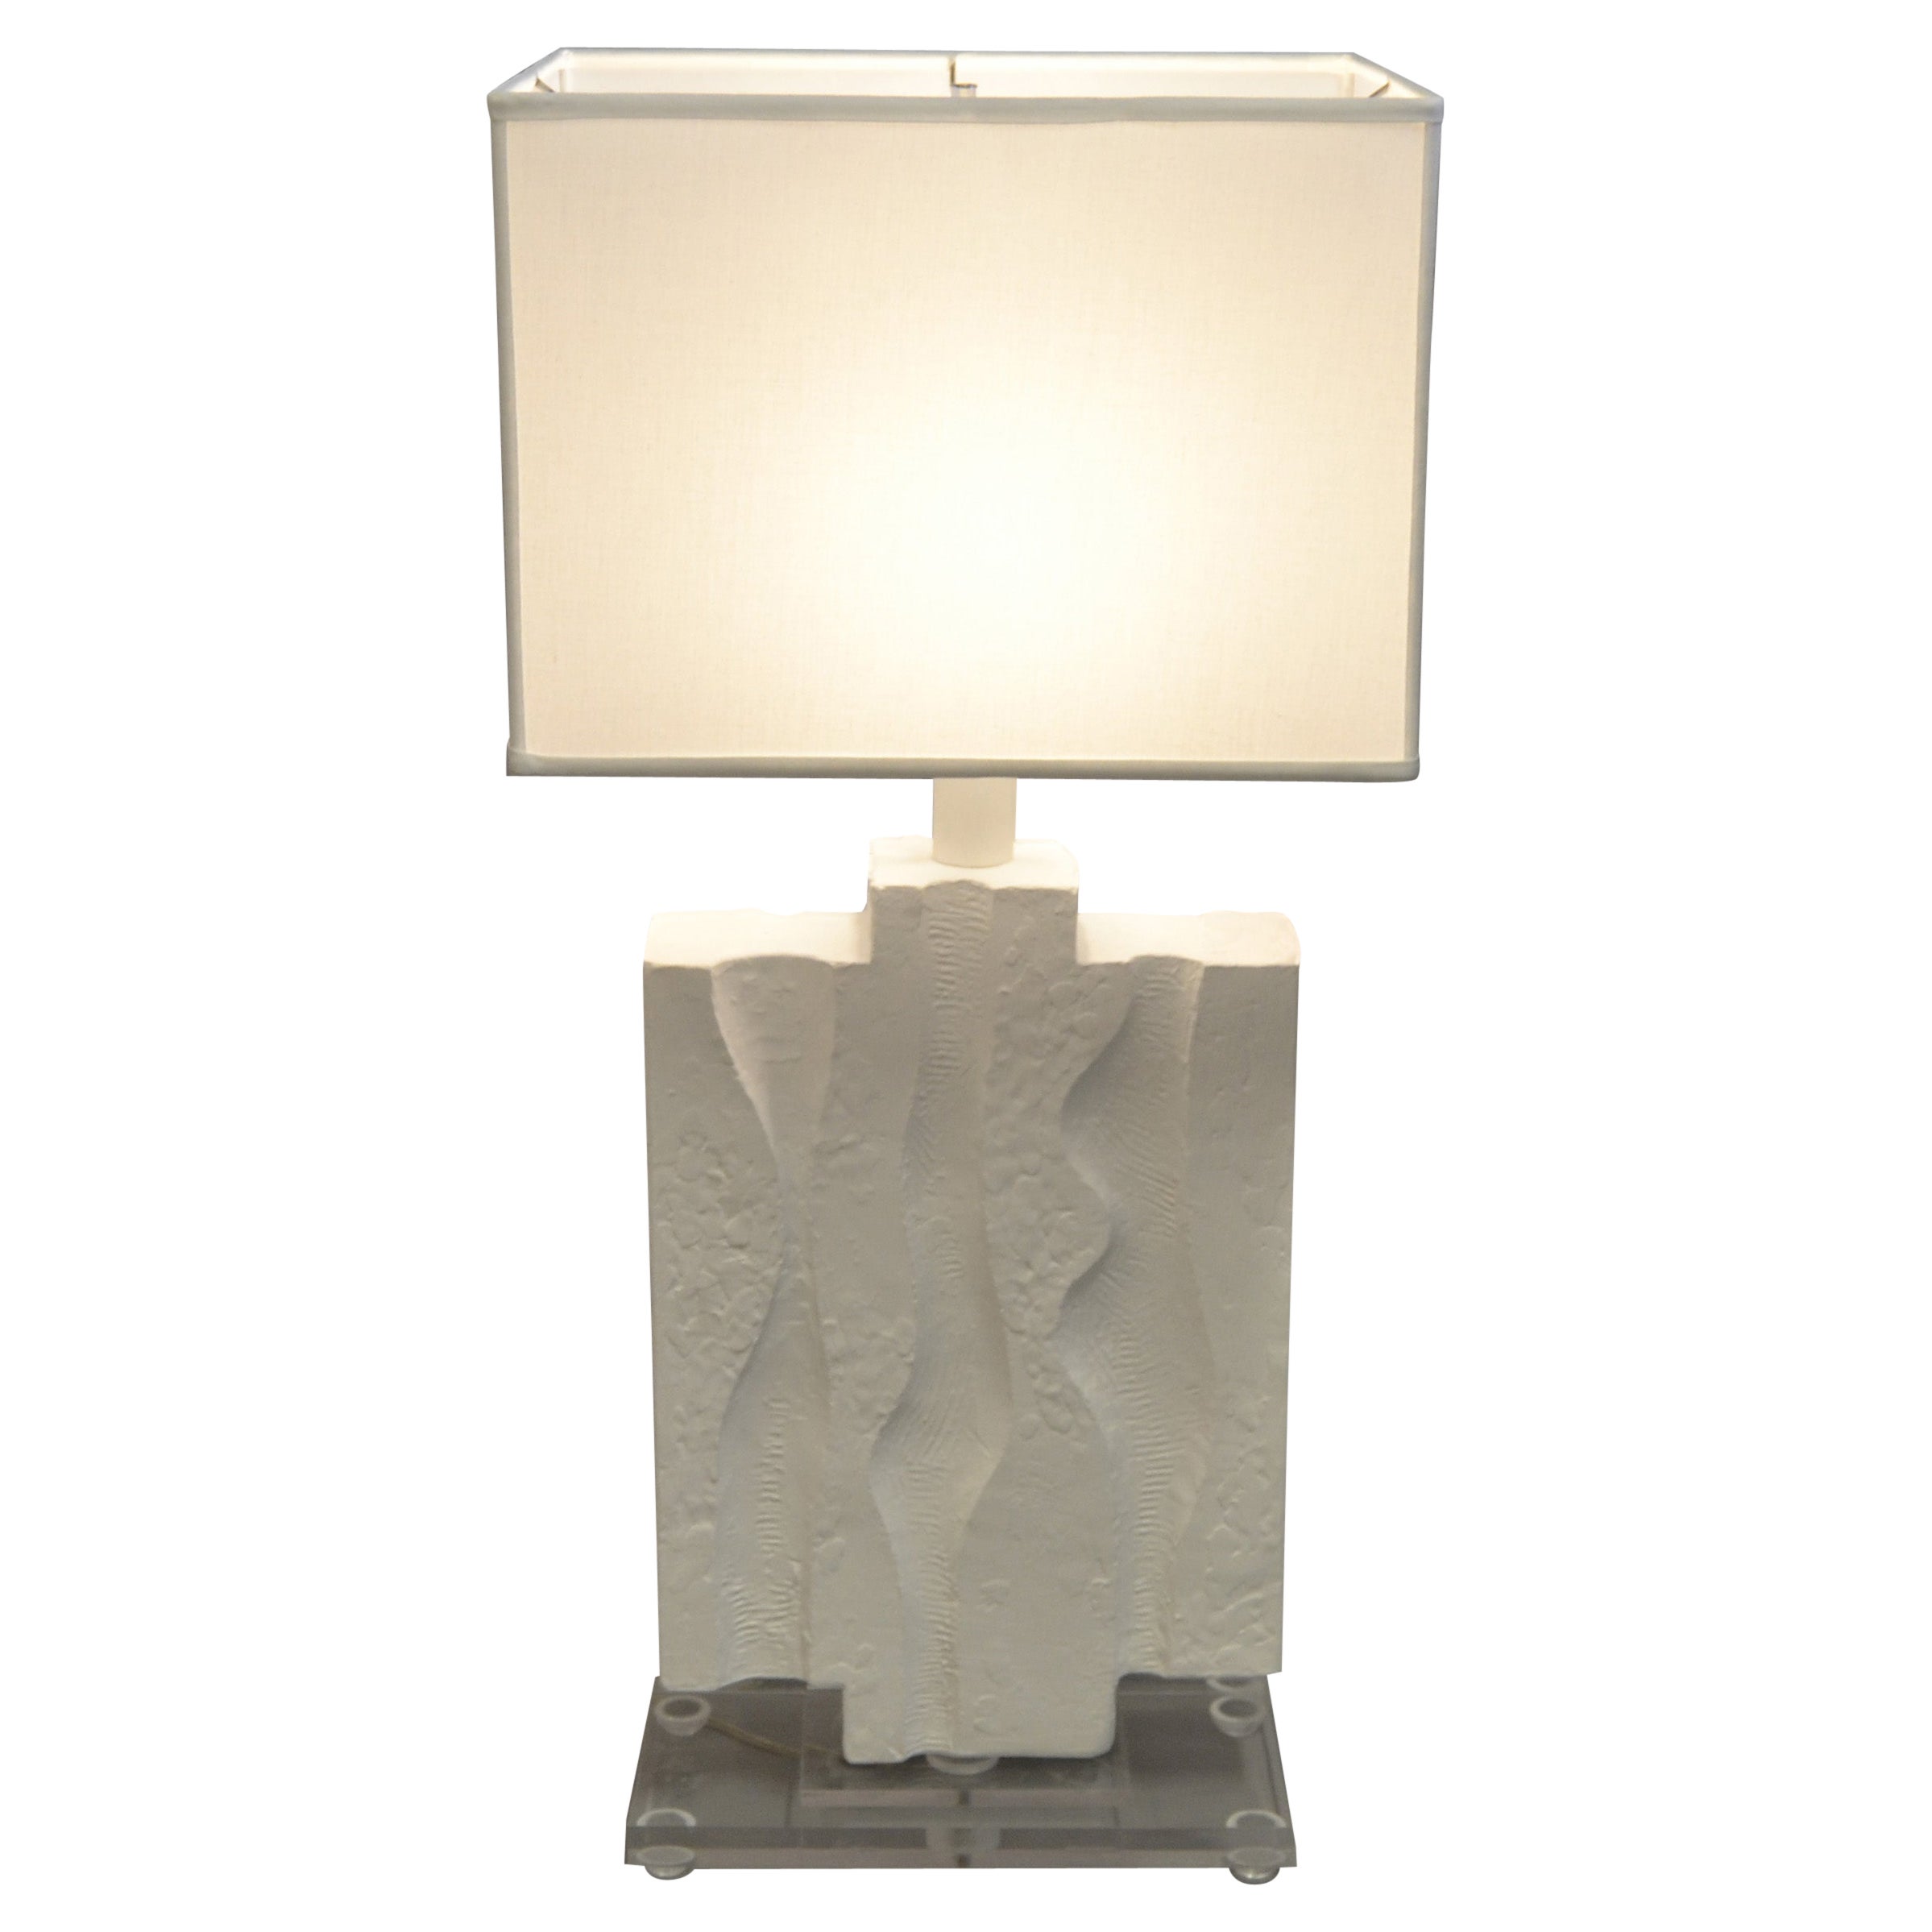 Iconic Sculptural Textured White Gesso Finish Plaster Table Lamp Acrylic Base For Sale